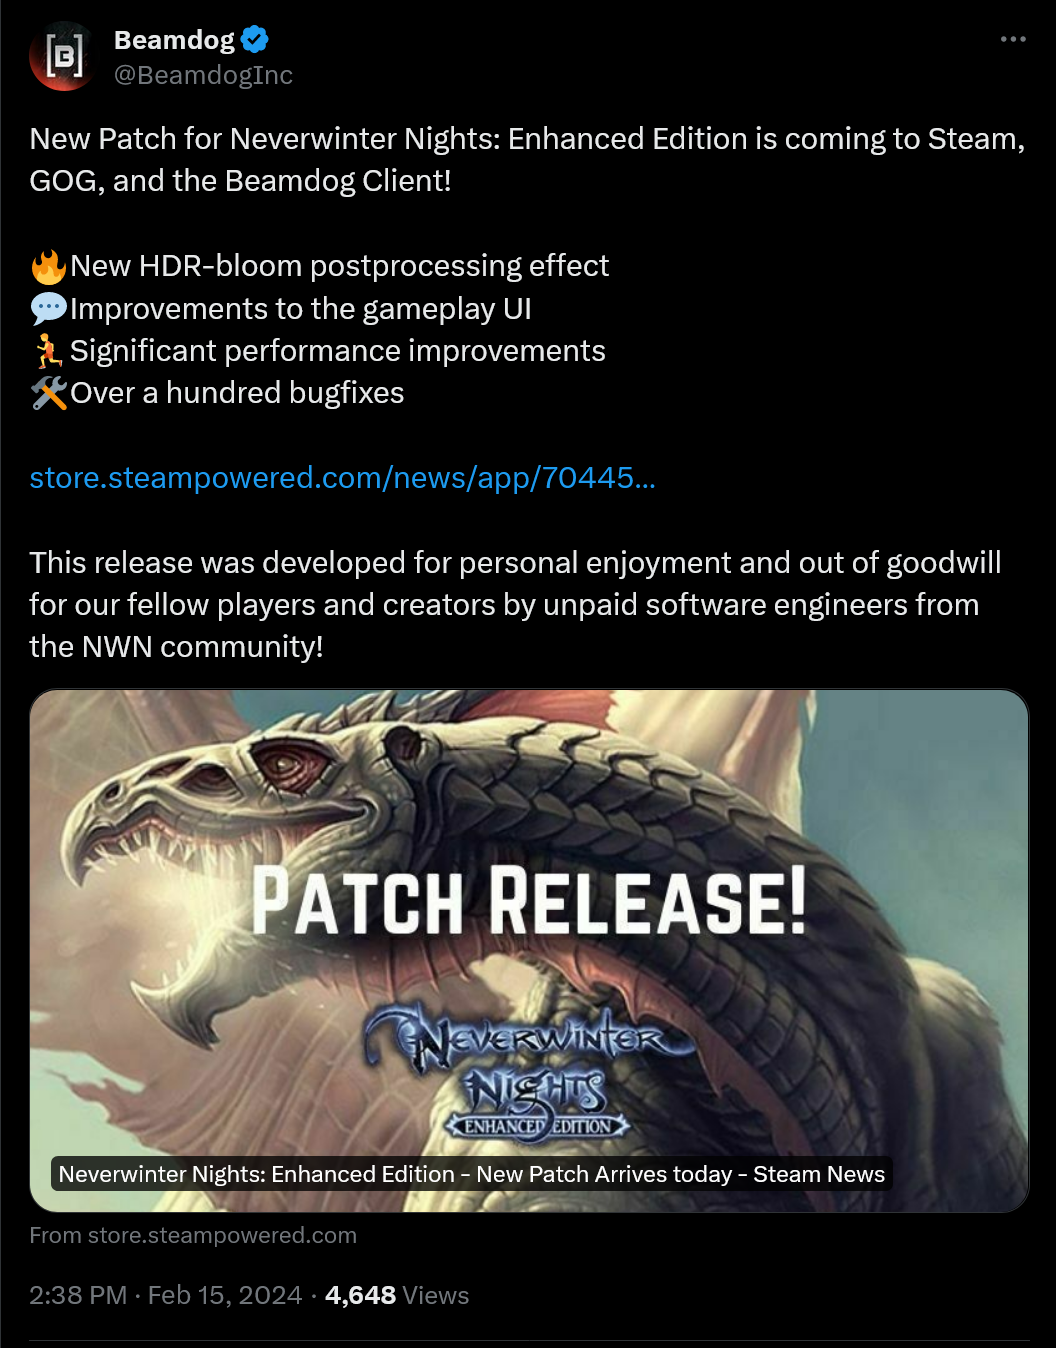 New Patch for Neverwinter Nights: Enhanced Edition is coming to Steam, GOG, and the Beamdog Client! 🔥New HDR-bloom postprocessing effect 💬Improvements to the gameplay UI 🏃Significant performance improvements 🛠Over a hundred bugfixes https://store.steampowered.com/news/app/704450/view/7597079377547967509